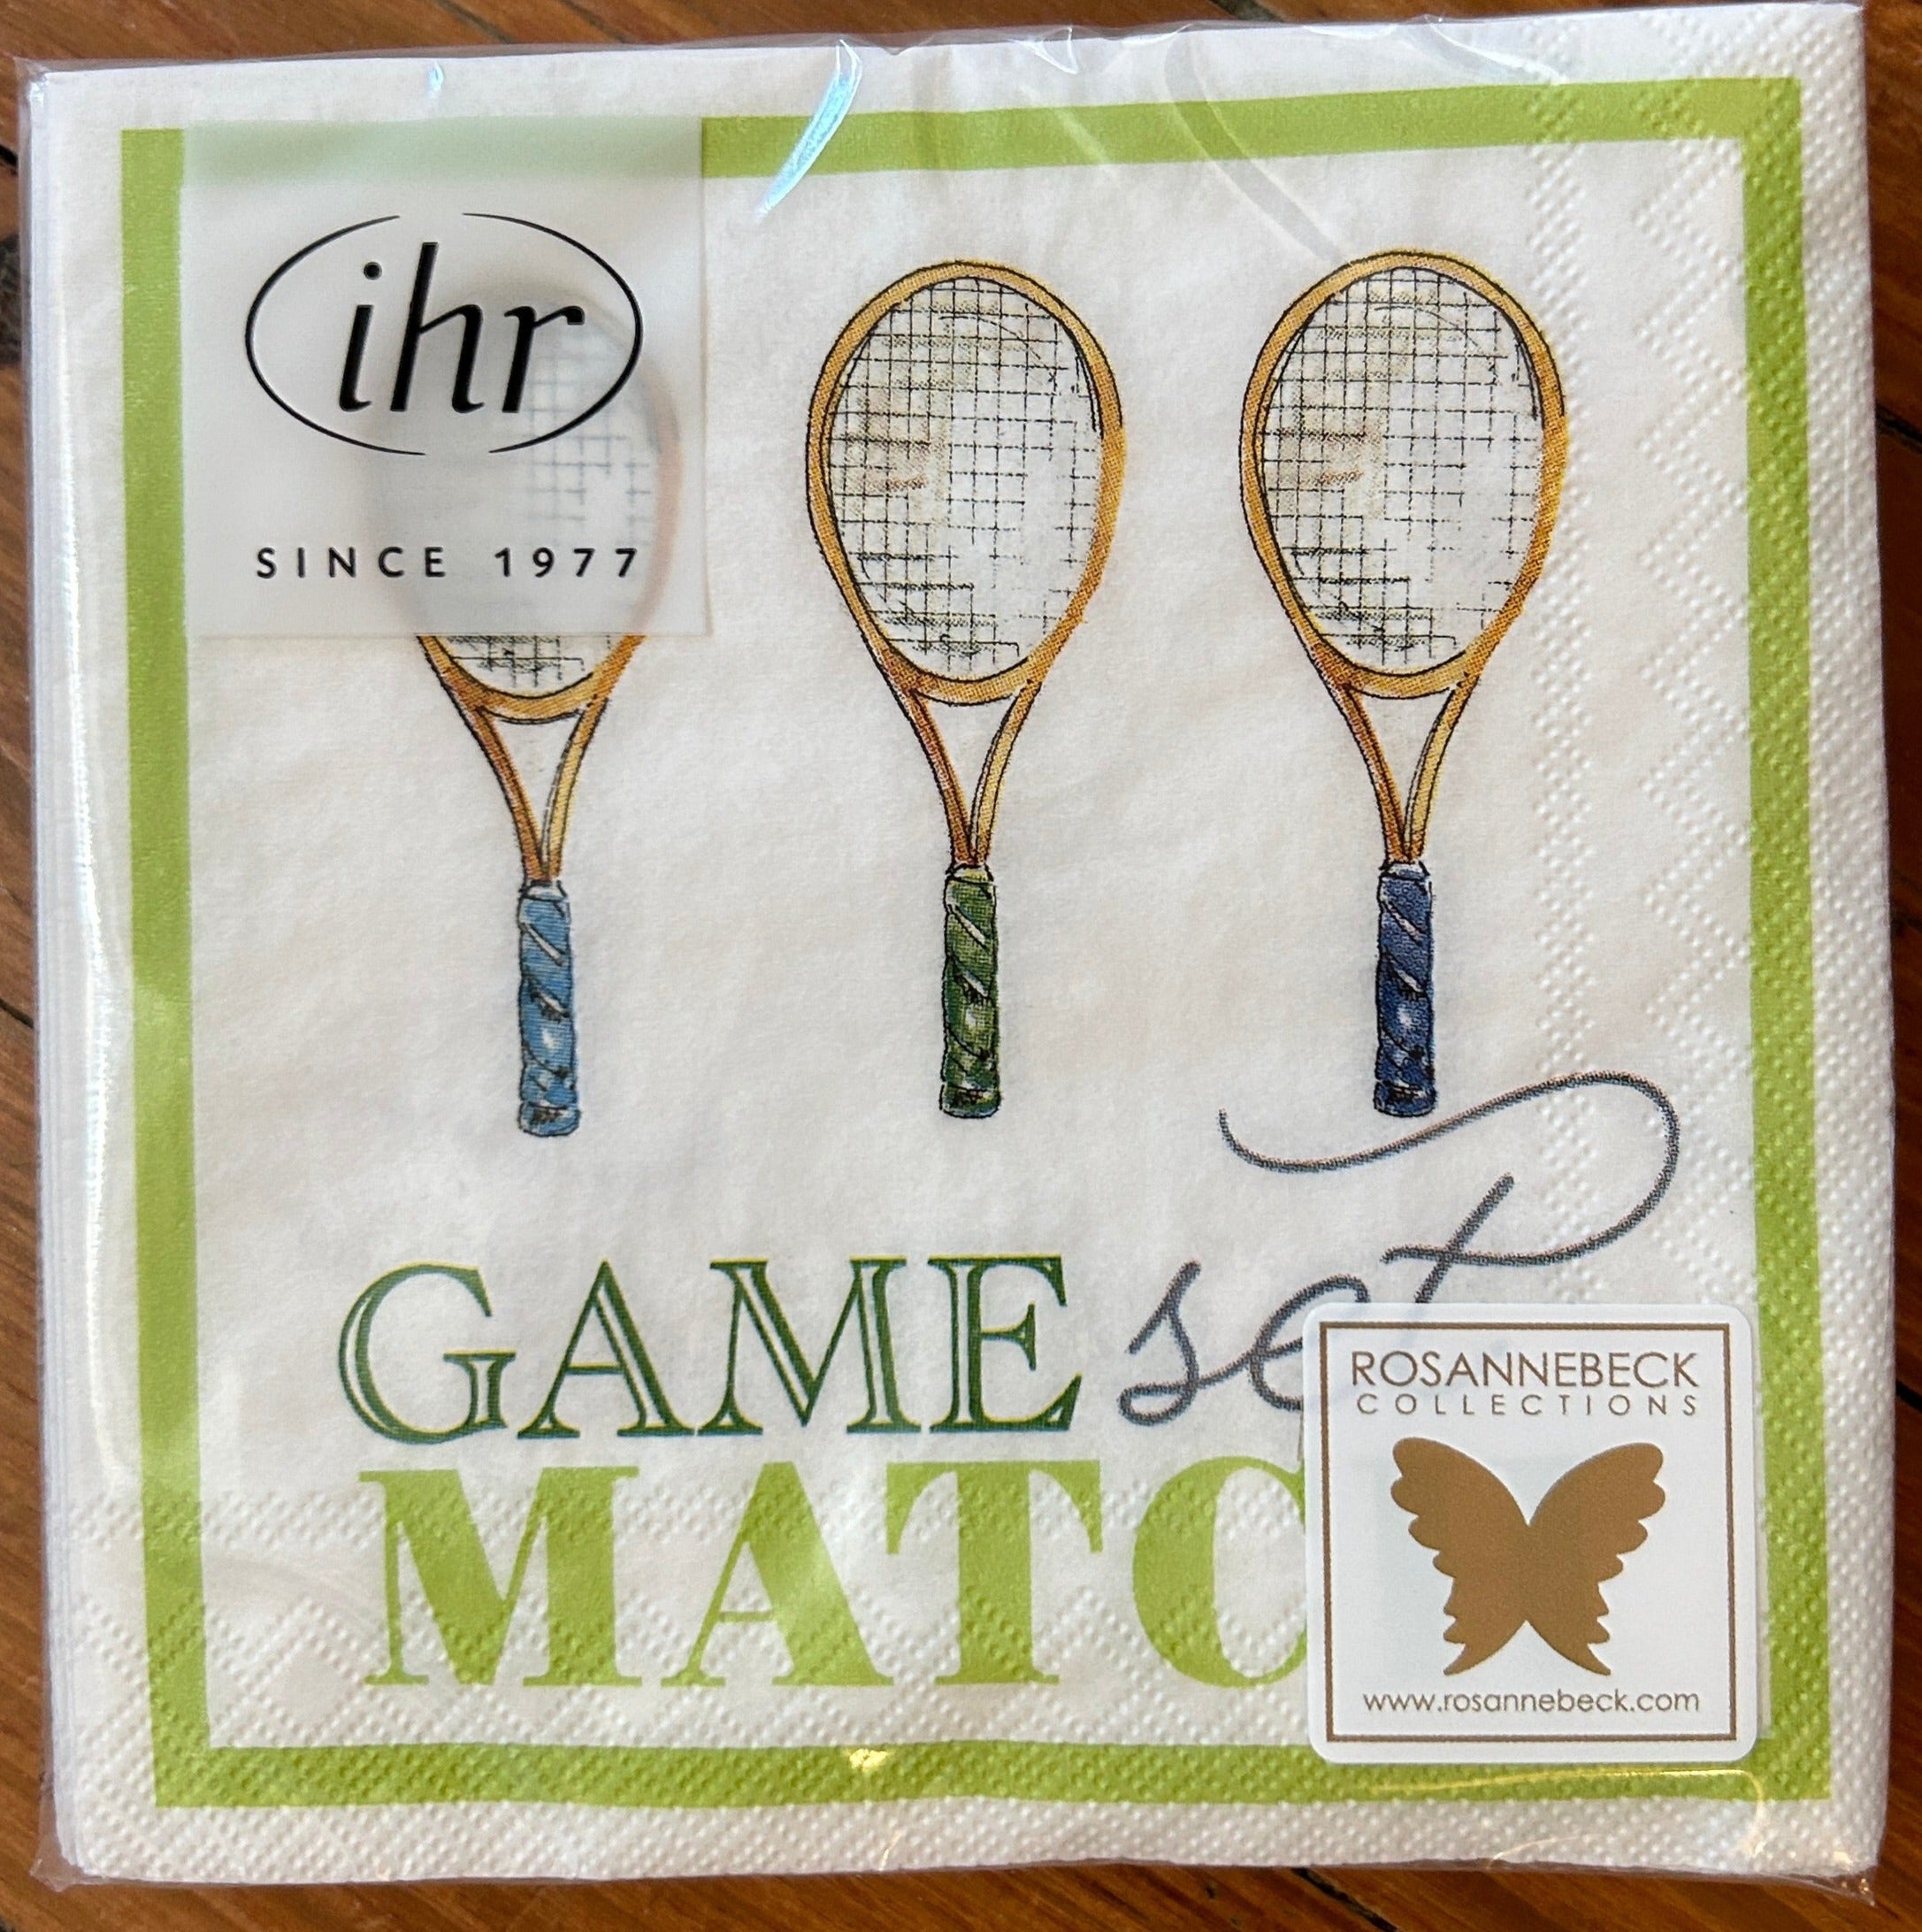 Game Set Match Tennis themed cocktail napkins in spring colors.. 